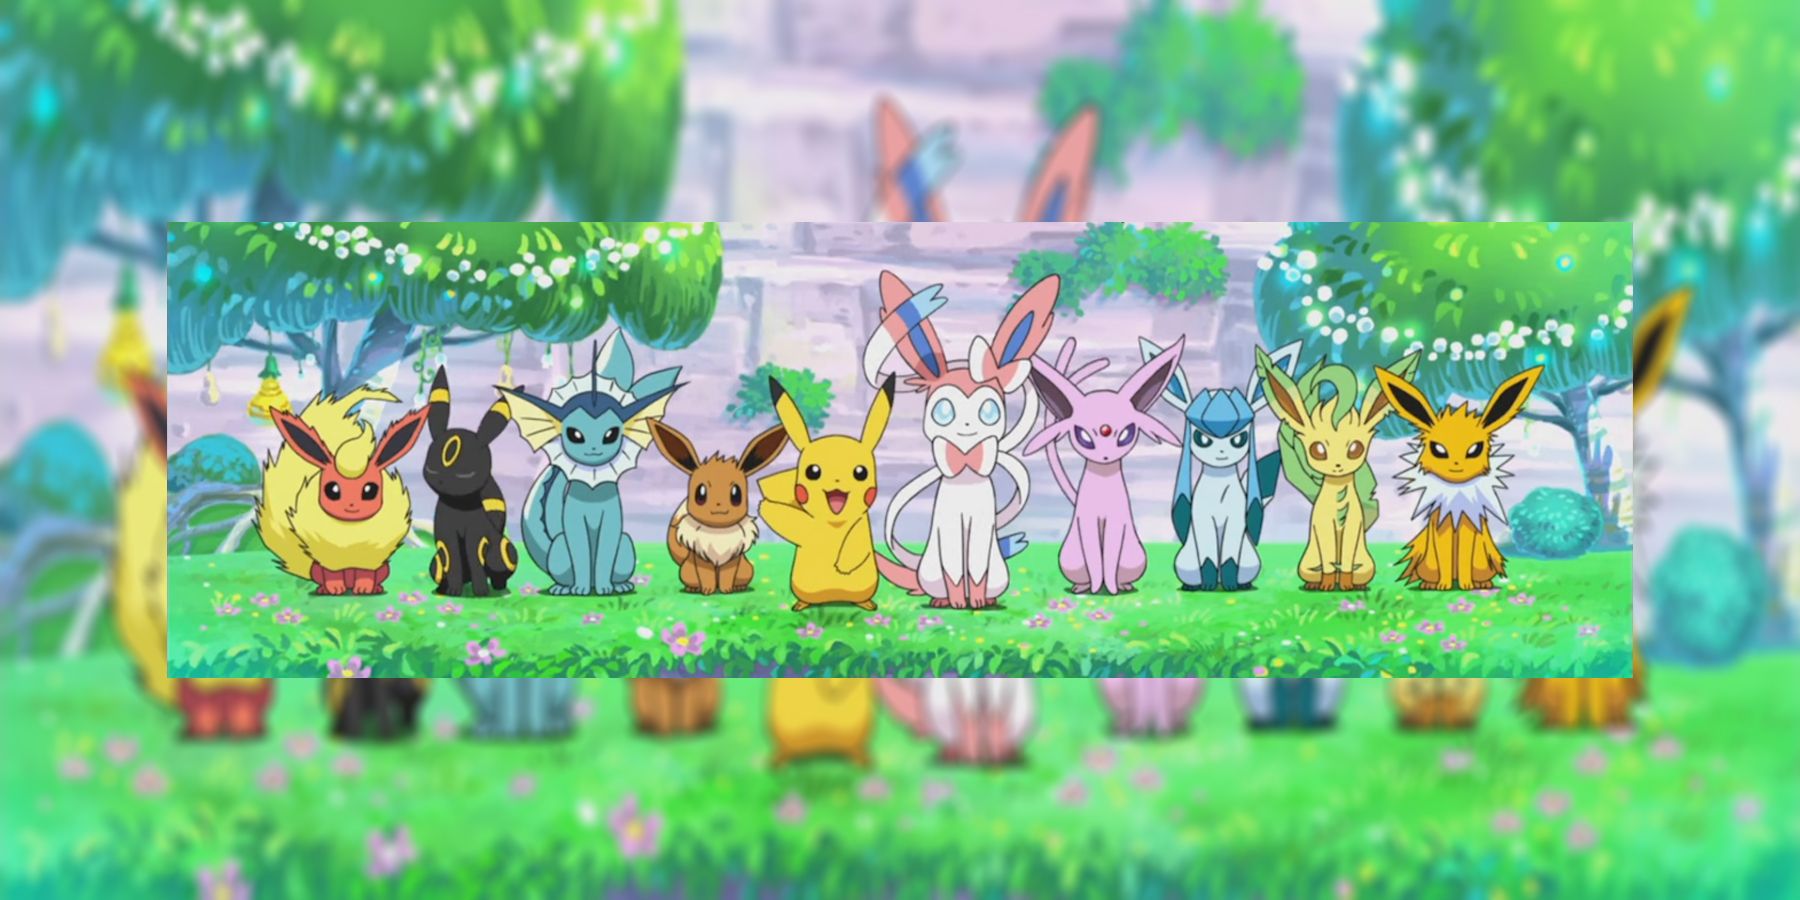 All of the Eeveelutions as of Pokemon Sword and Shield lined up with Eevee and Pikachu as well. From left to right: Flareon, Umbreon, Vaporeon, Eevee, Pikachu, Sylveon, Espeon, Glaceon, Leafeon, and Jolteon.